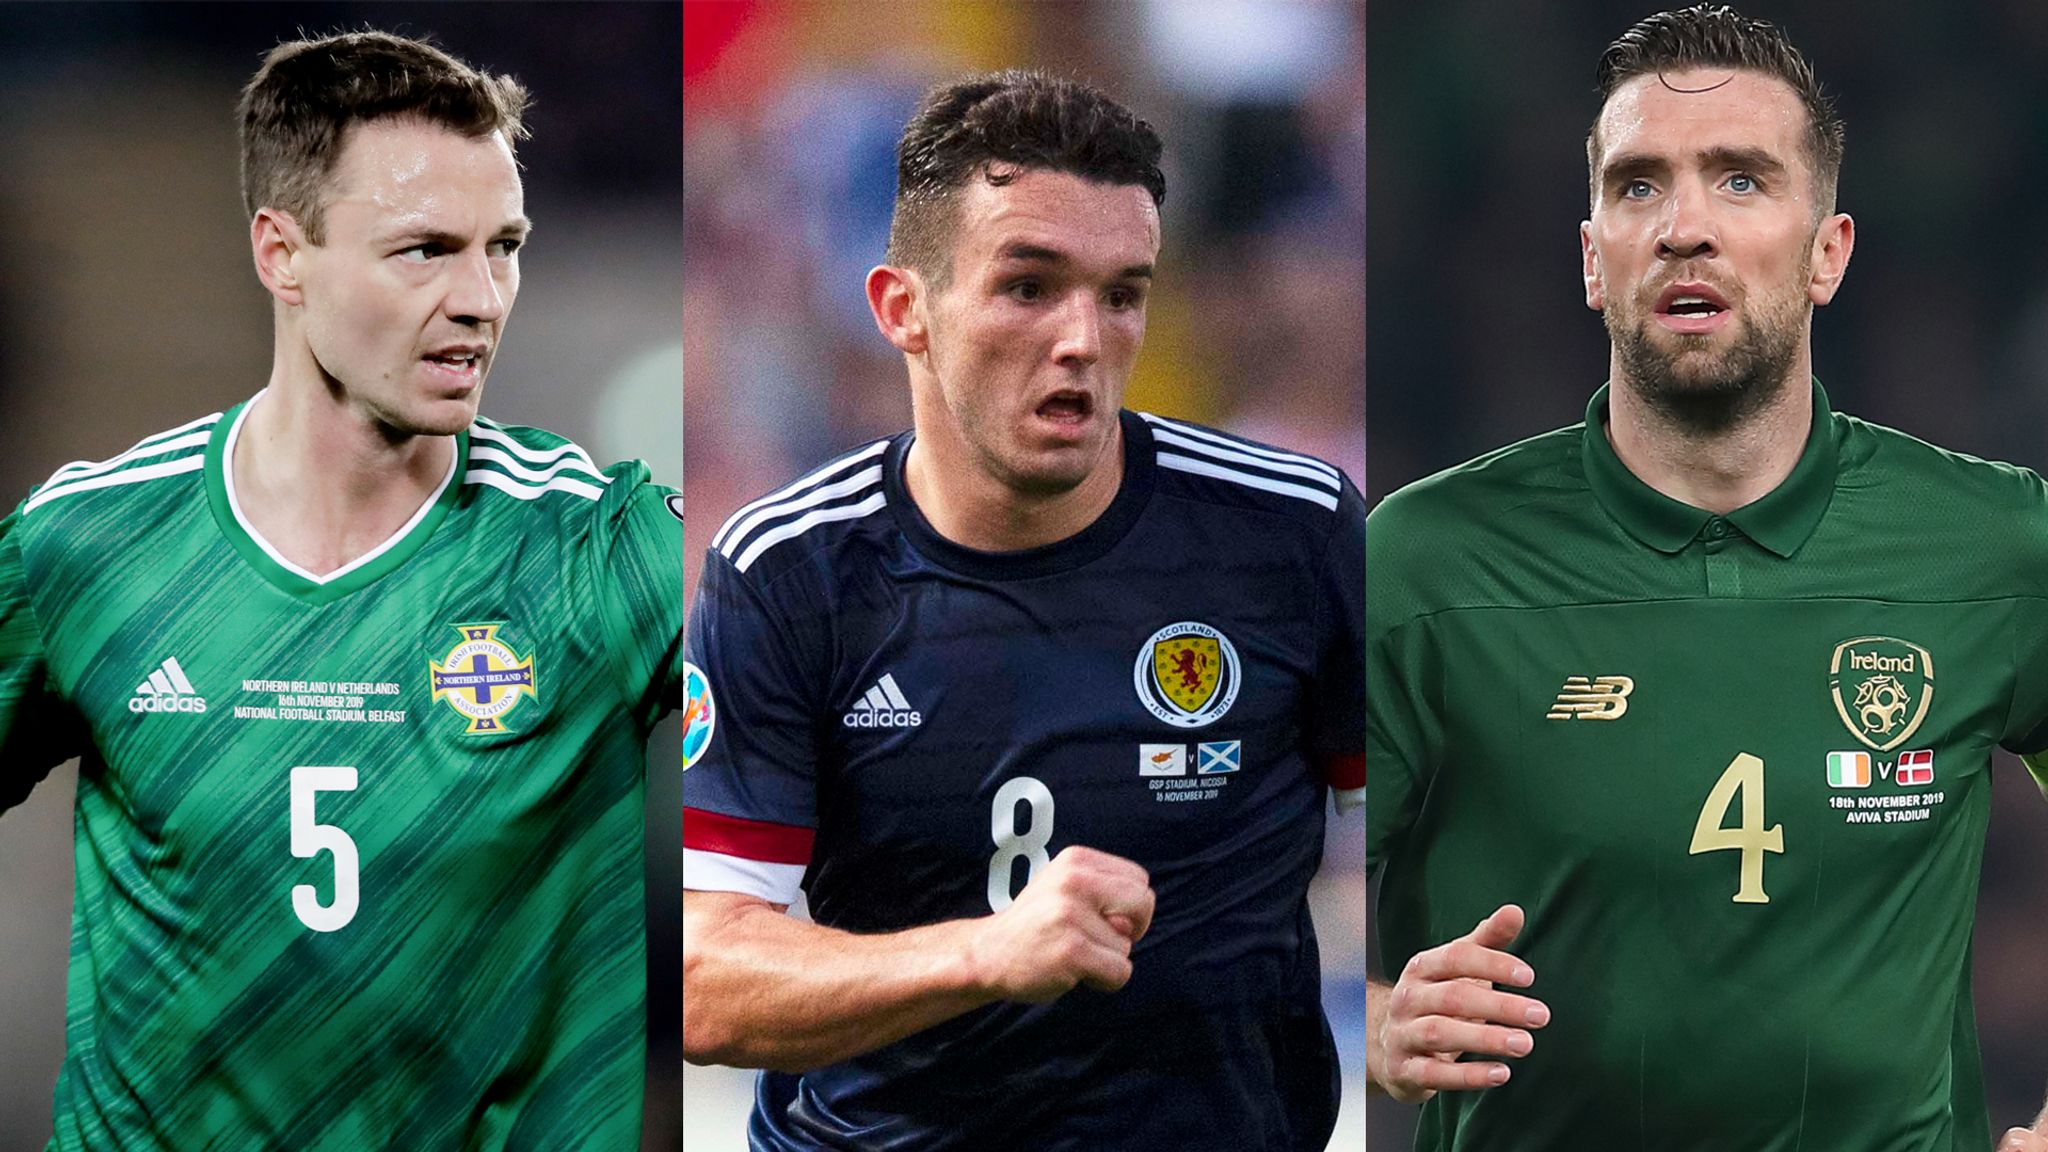 Euro 2020 play-off fixtures Scotland, Northern Ireland and Republic of Ireland feature Football News Sky Sports